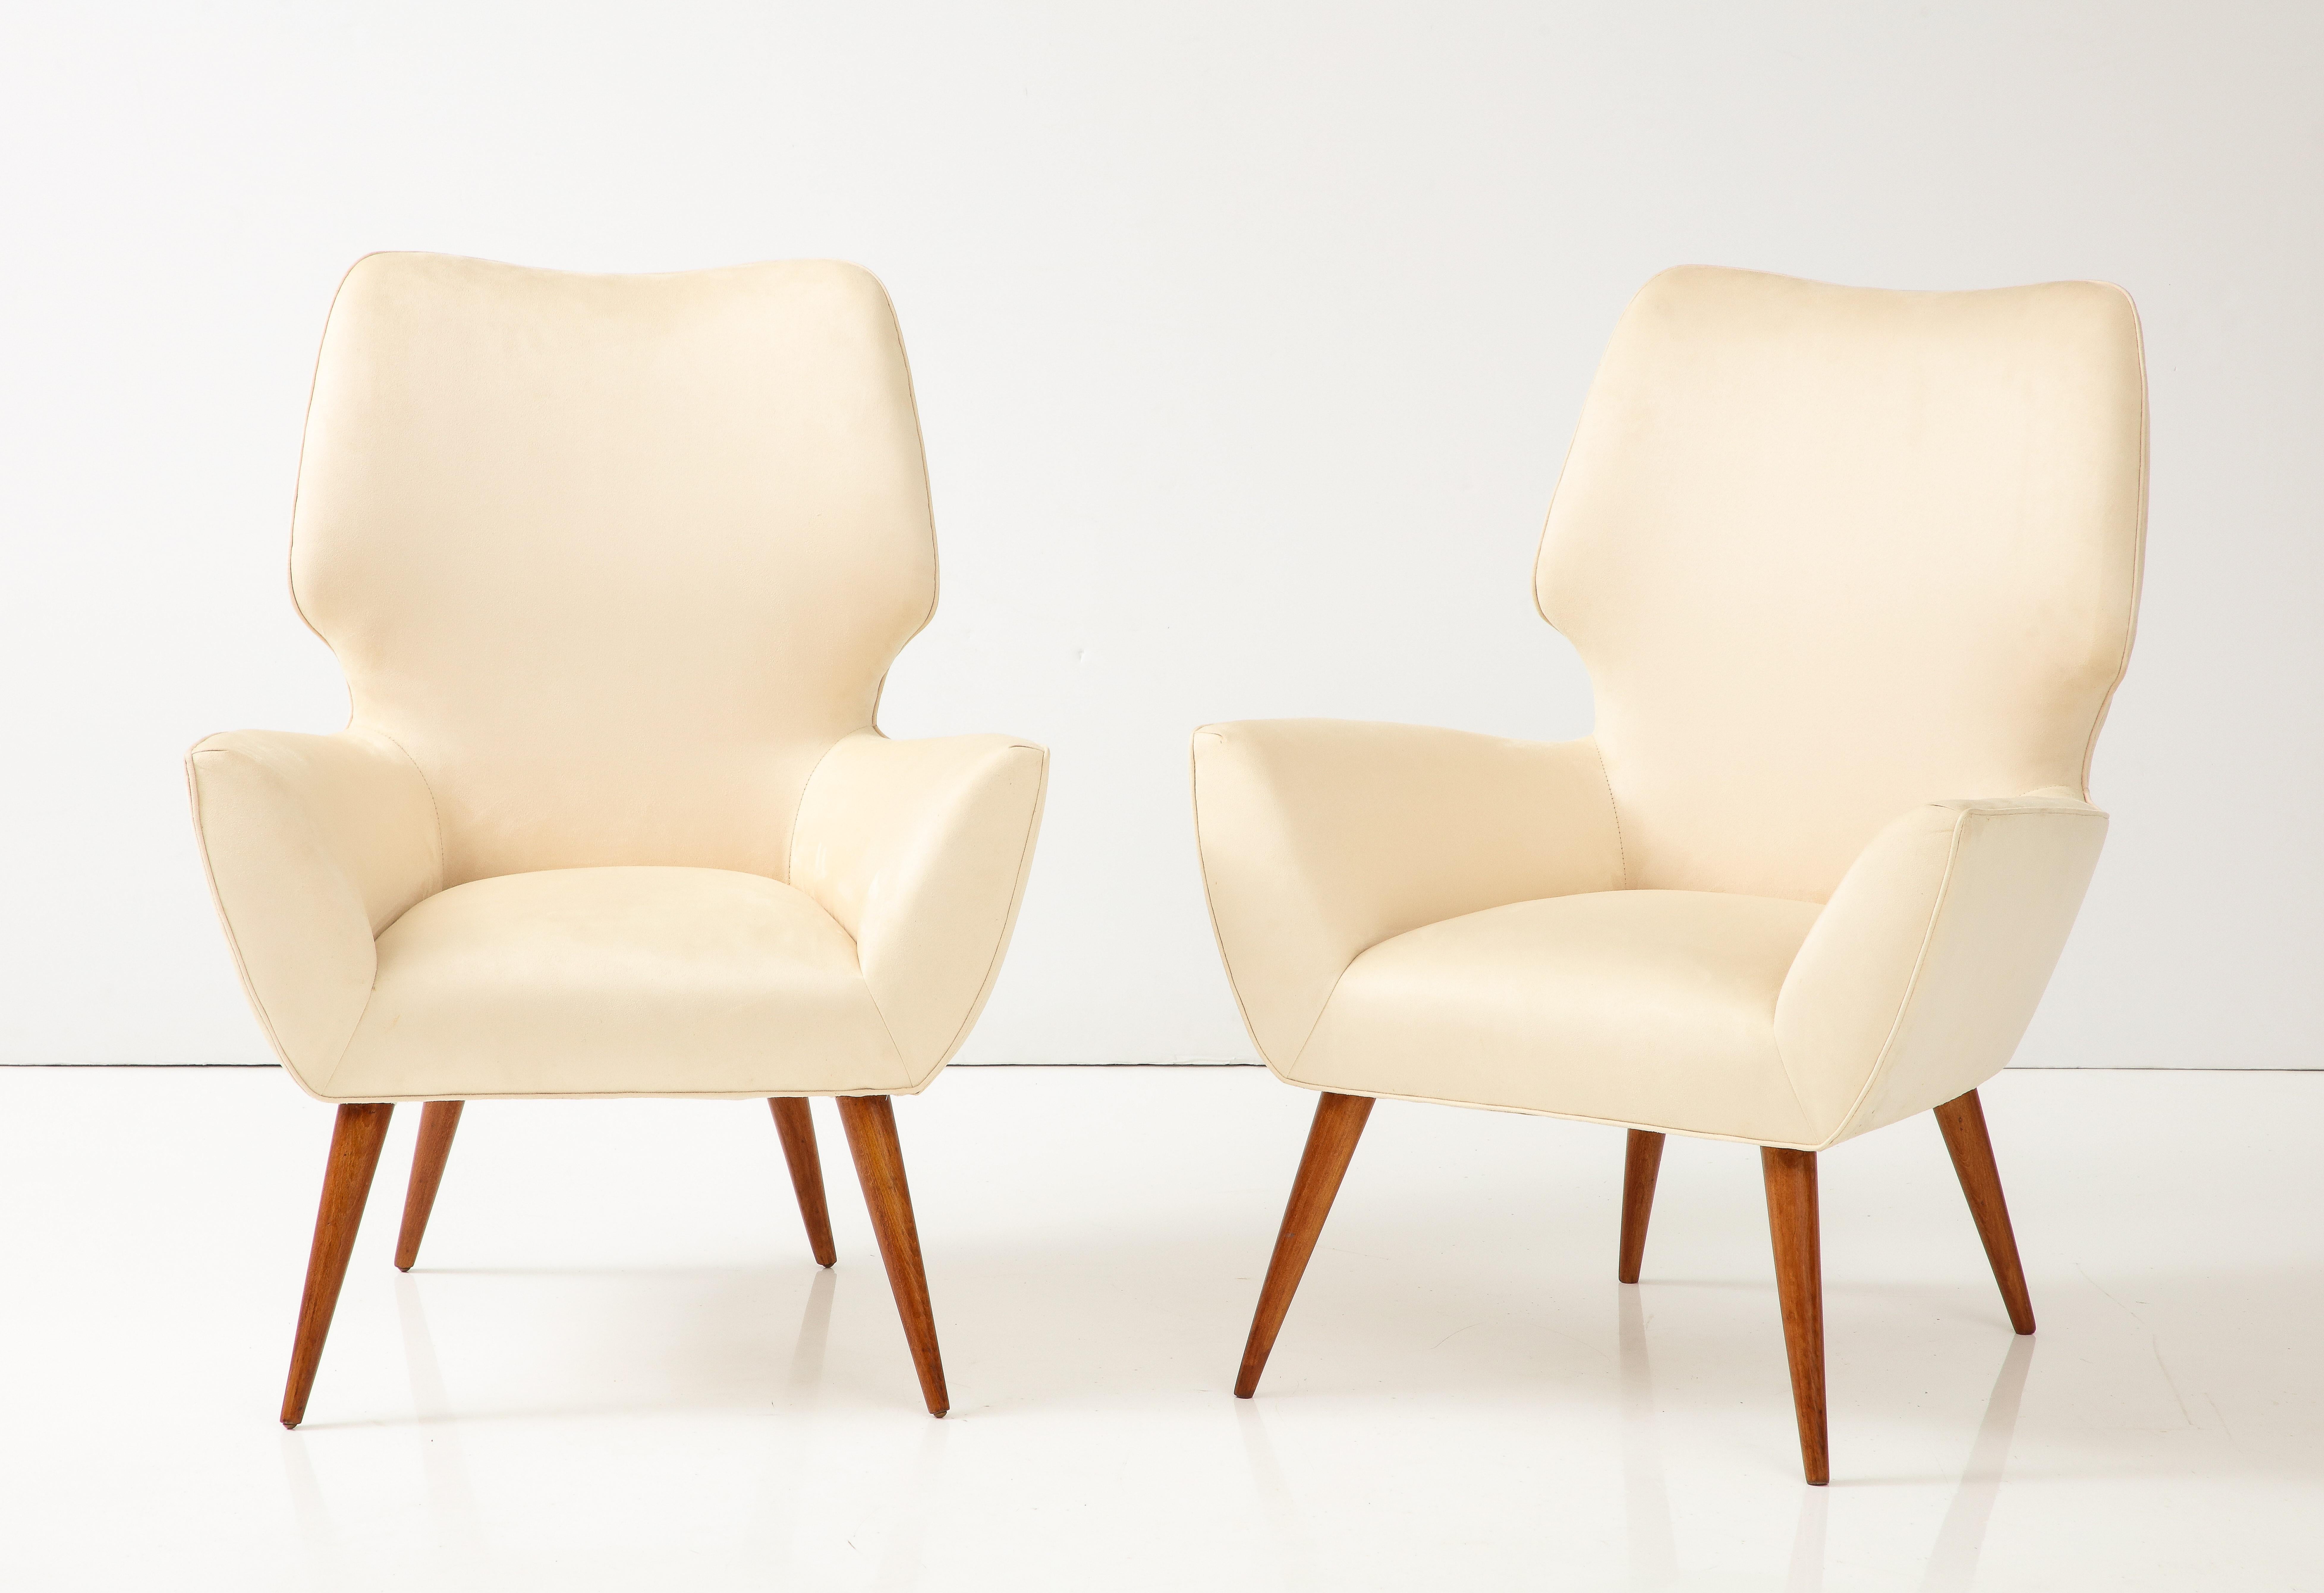 Mid-20th Century Pair of Italian Armchairs with Wood Legs, Italy, circa 1940 For Sale